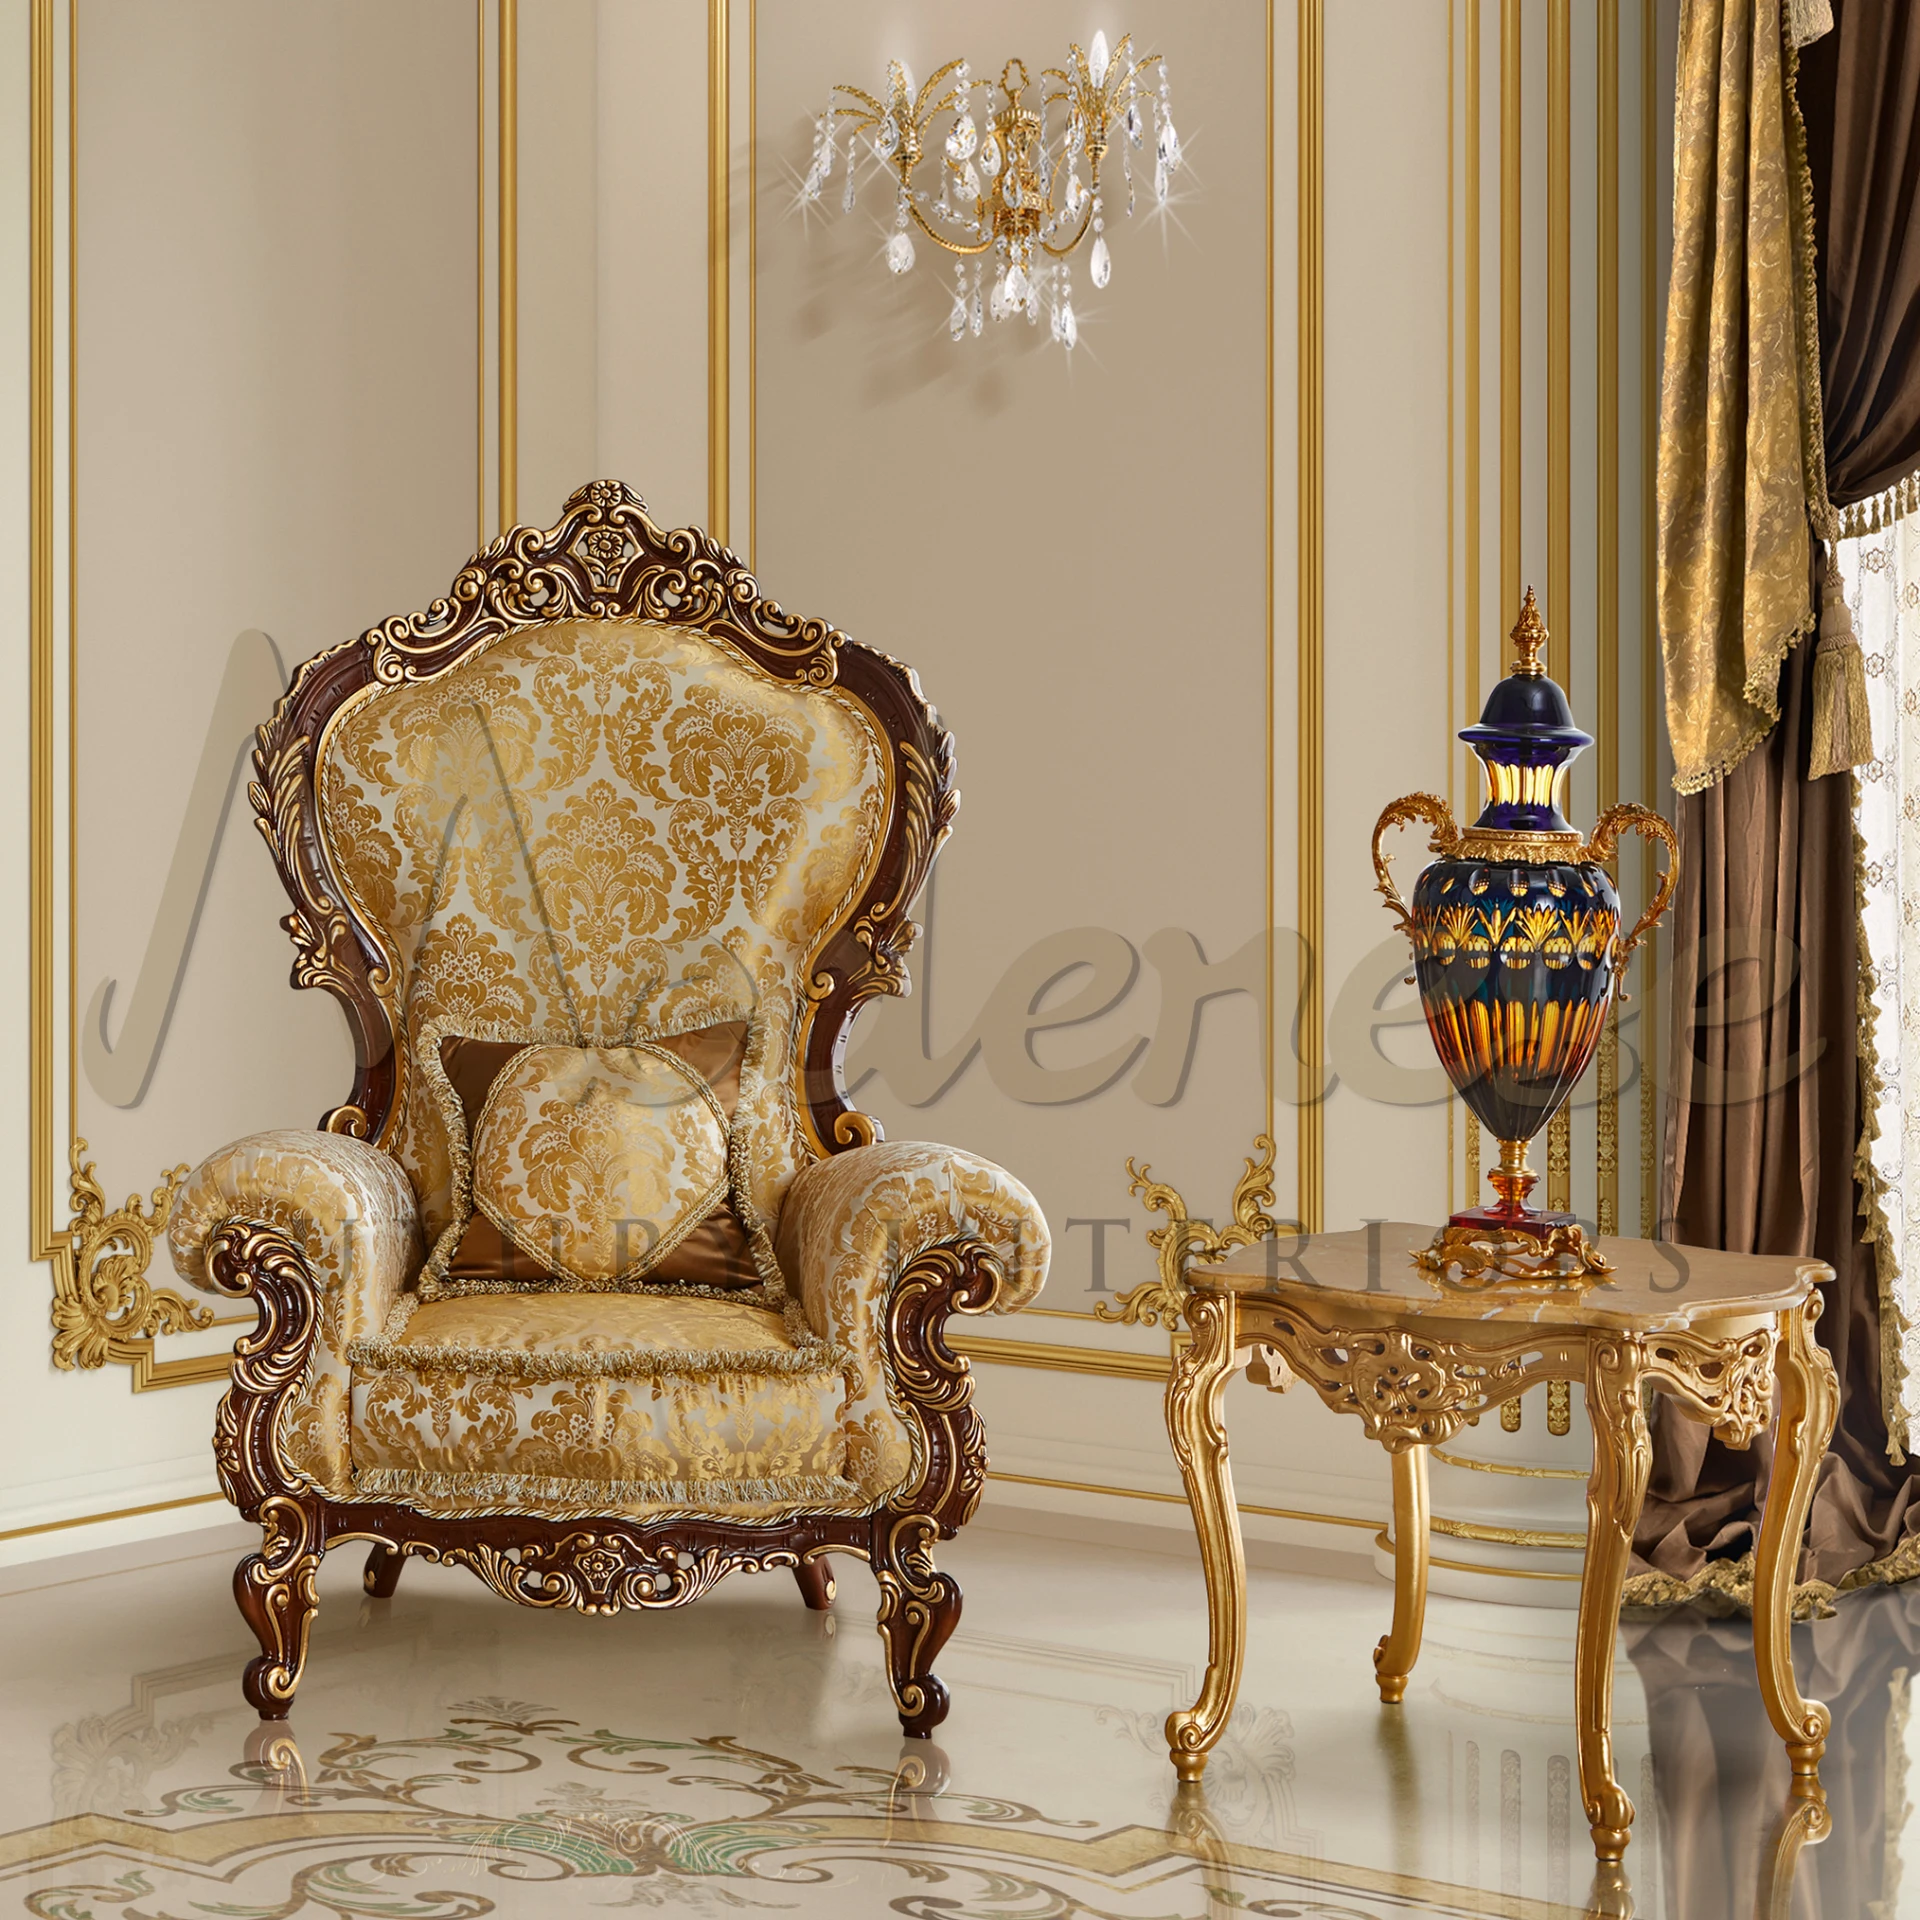 Luxury Golden Rococo Armchair in rococo style, with Italian design elements and pattern fabric for sophisticated interiors.